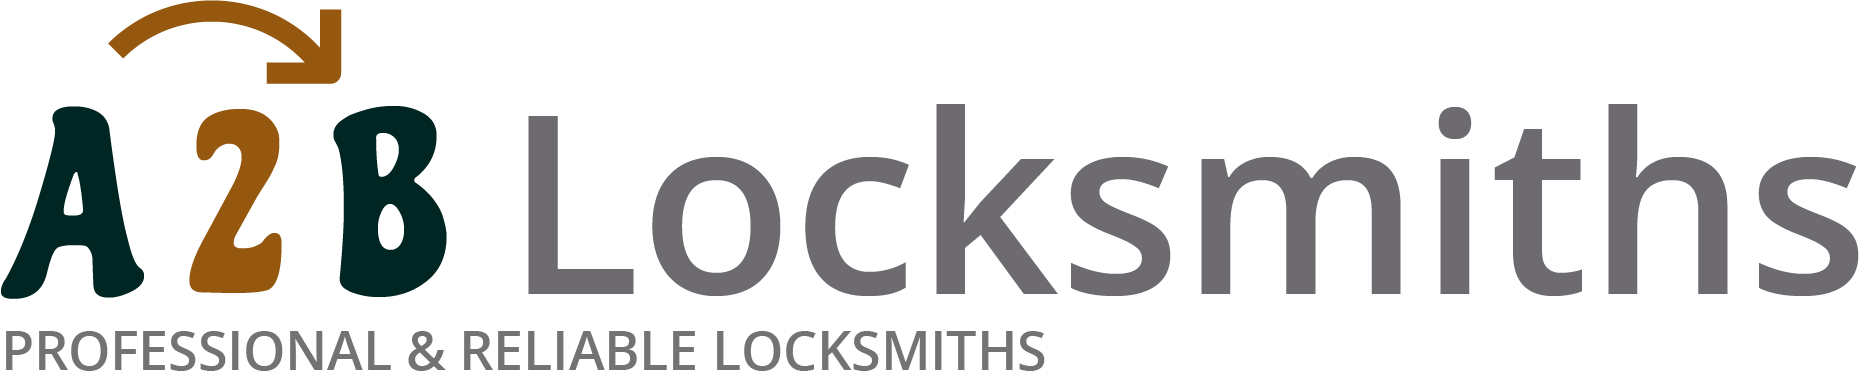 If you are locked out of house in Redditch, our 24/7 local emergency locksmith services can help you.